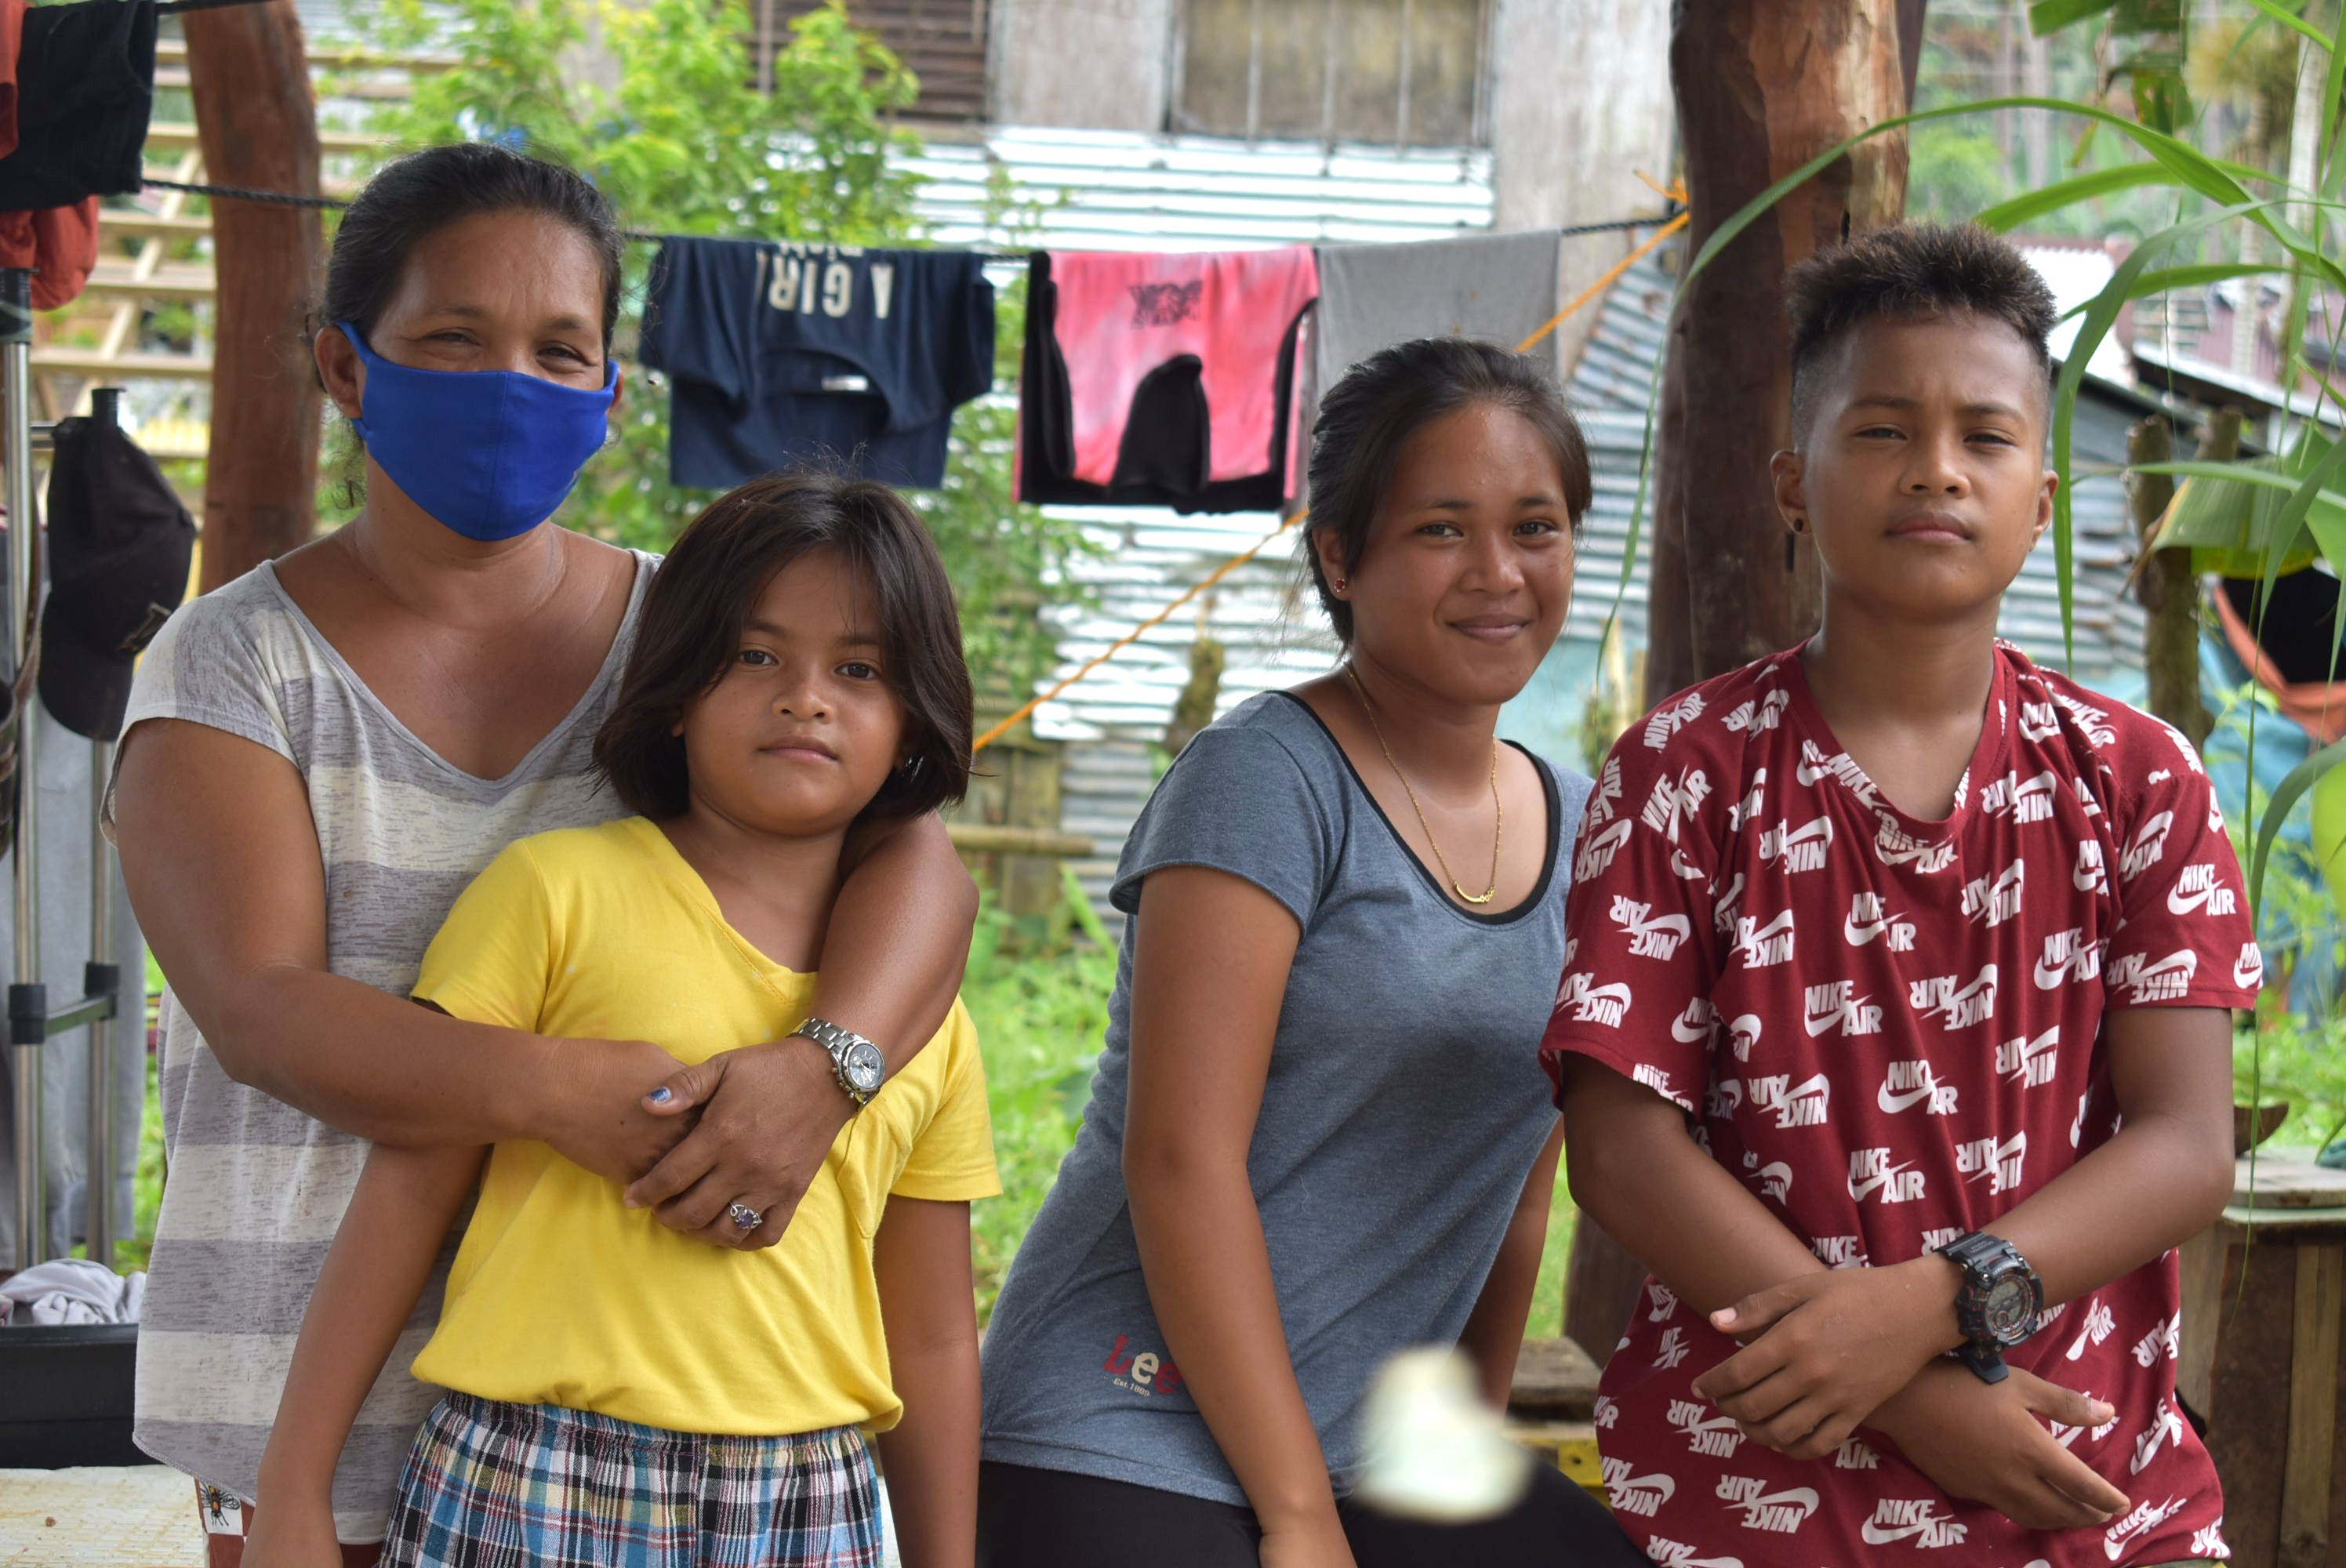 ShelterBox has an impact in Philippines distributing essential aid